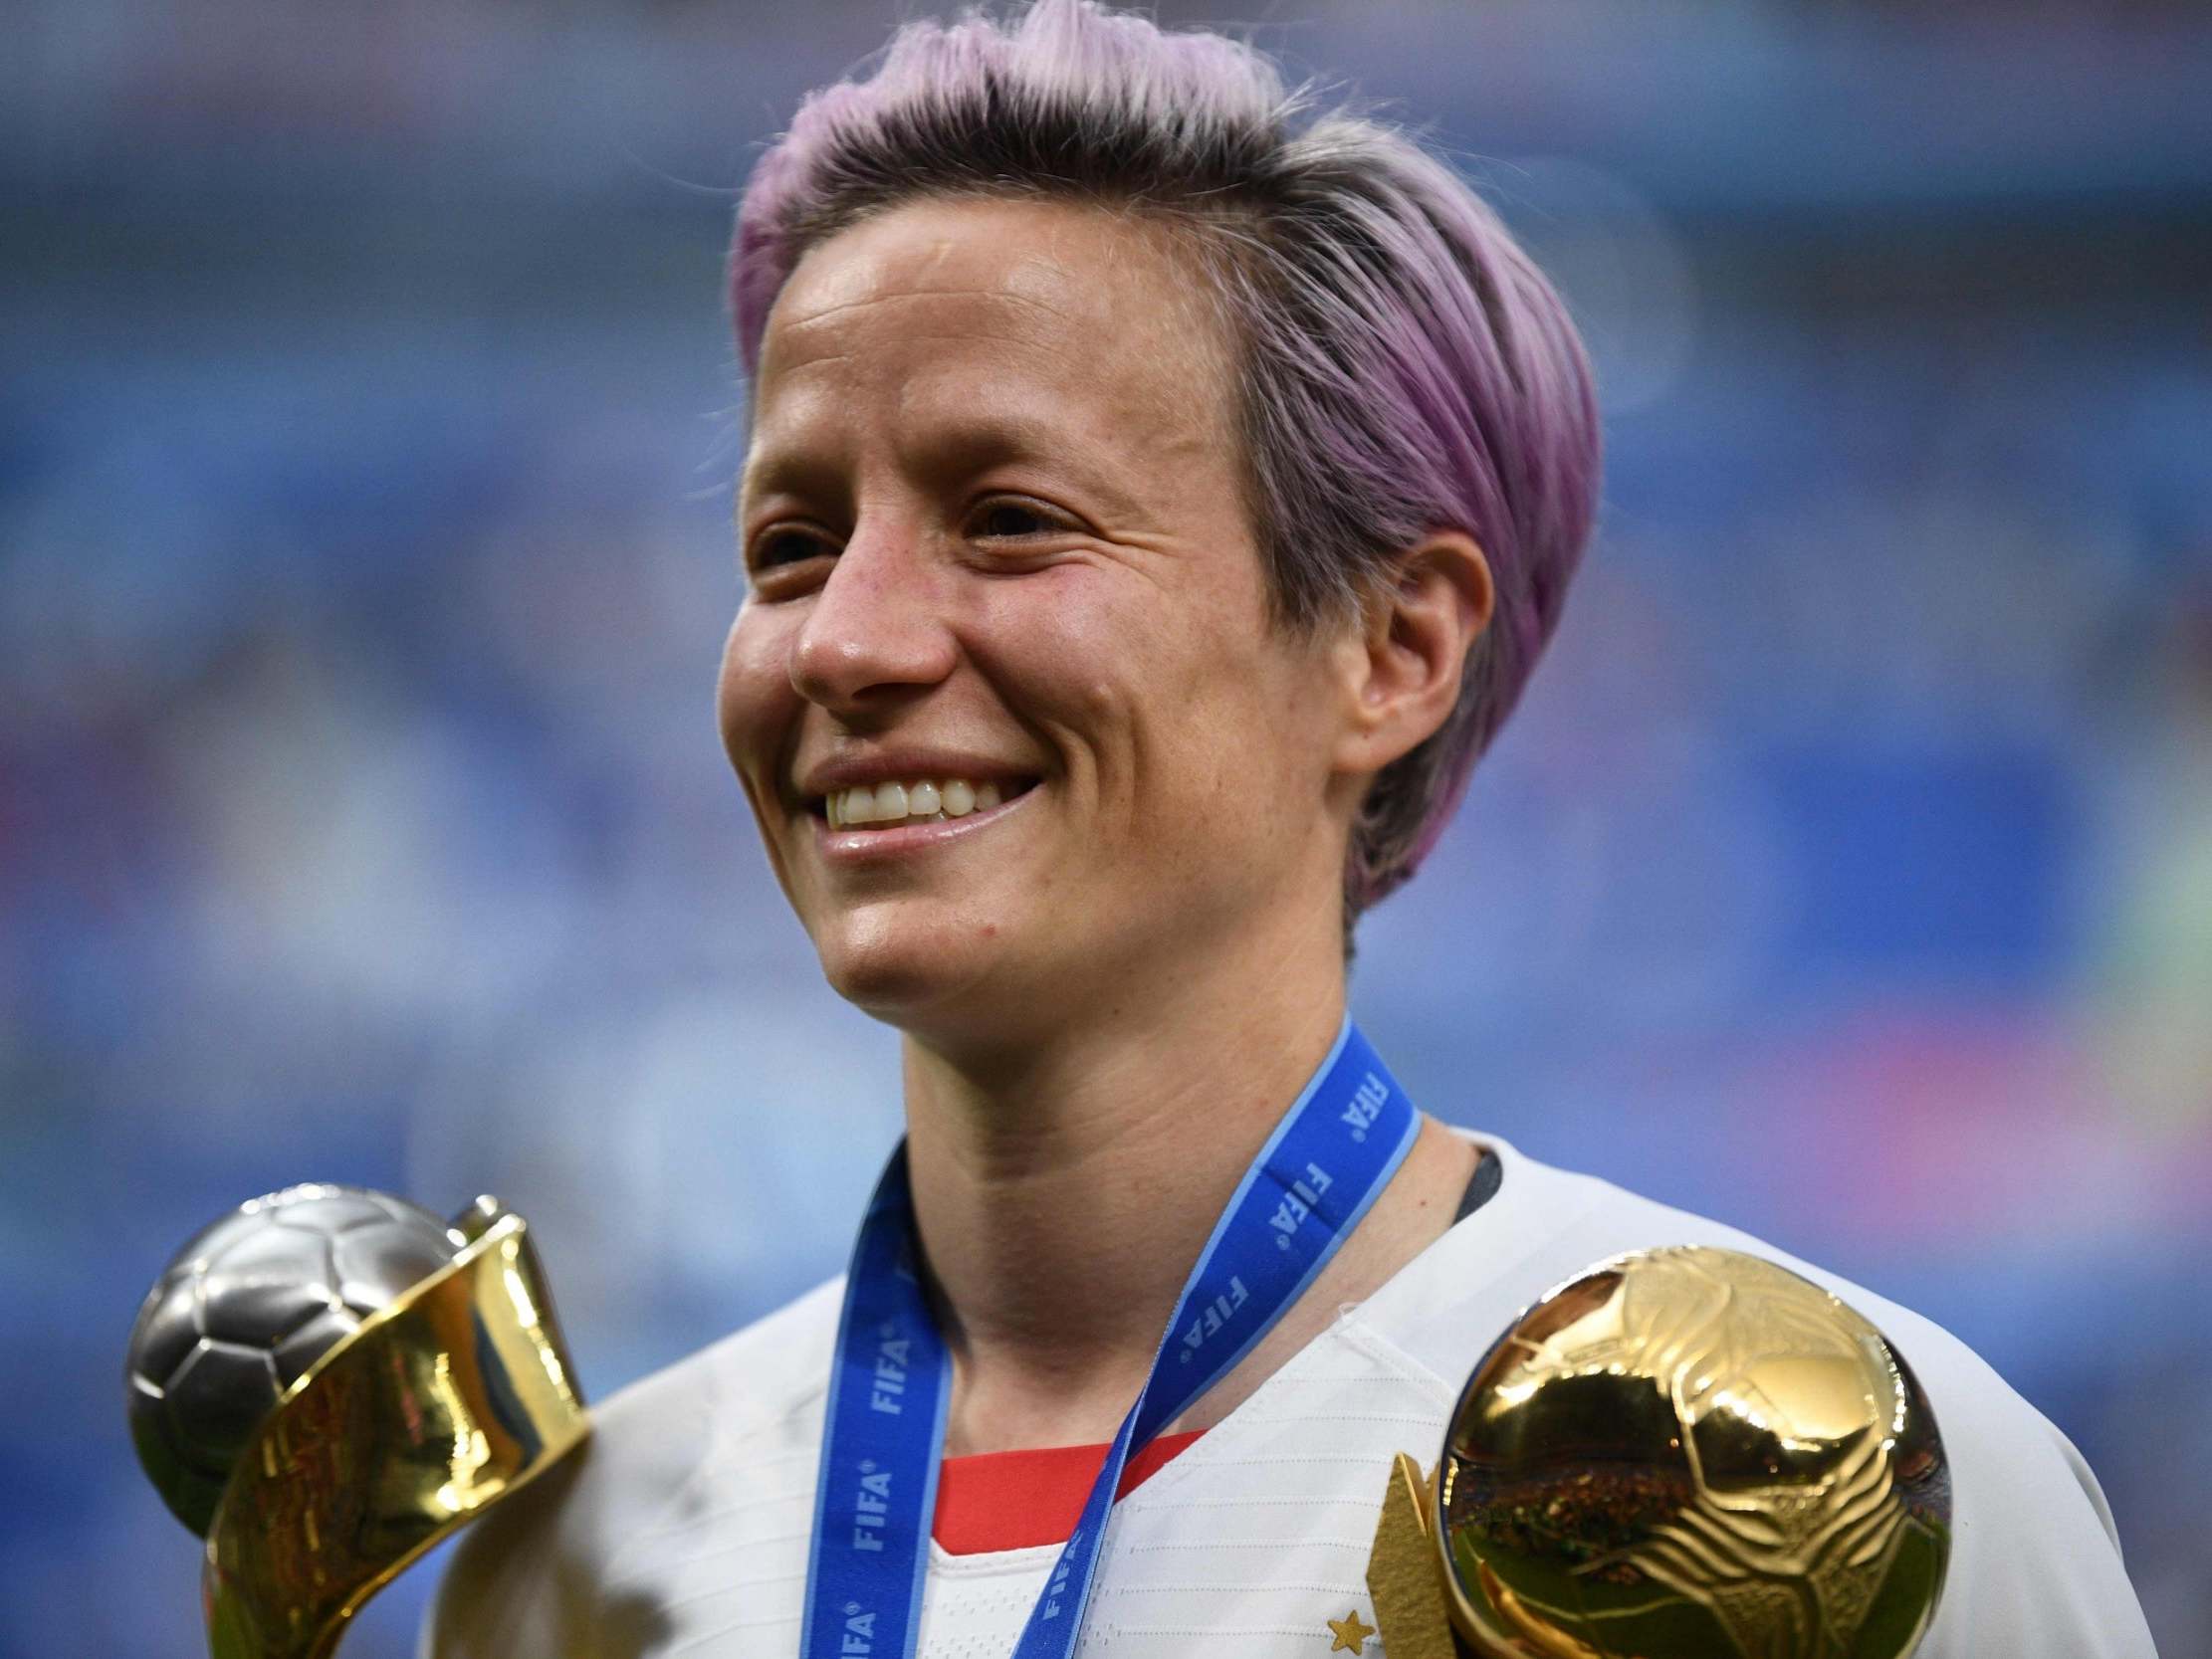 Straight women need to stop claiming they'd 'go gay' for Megan Rapinoe if they really want to be LGBT+ allies